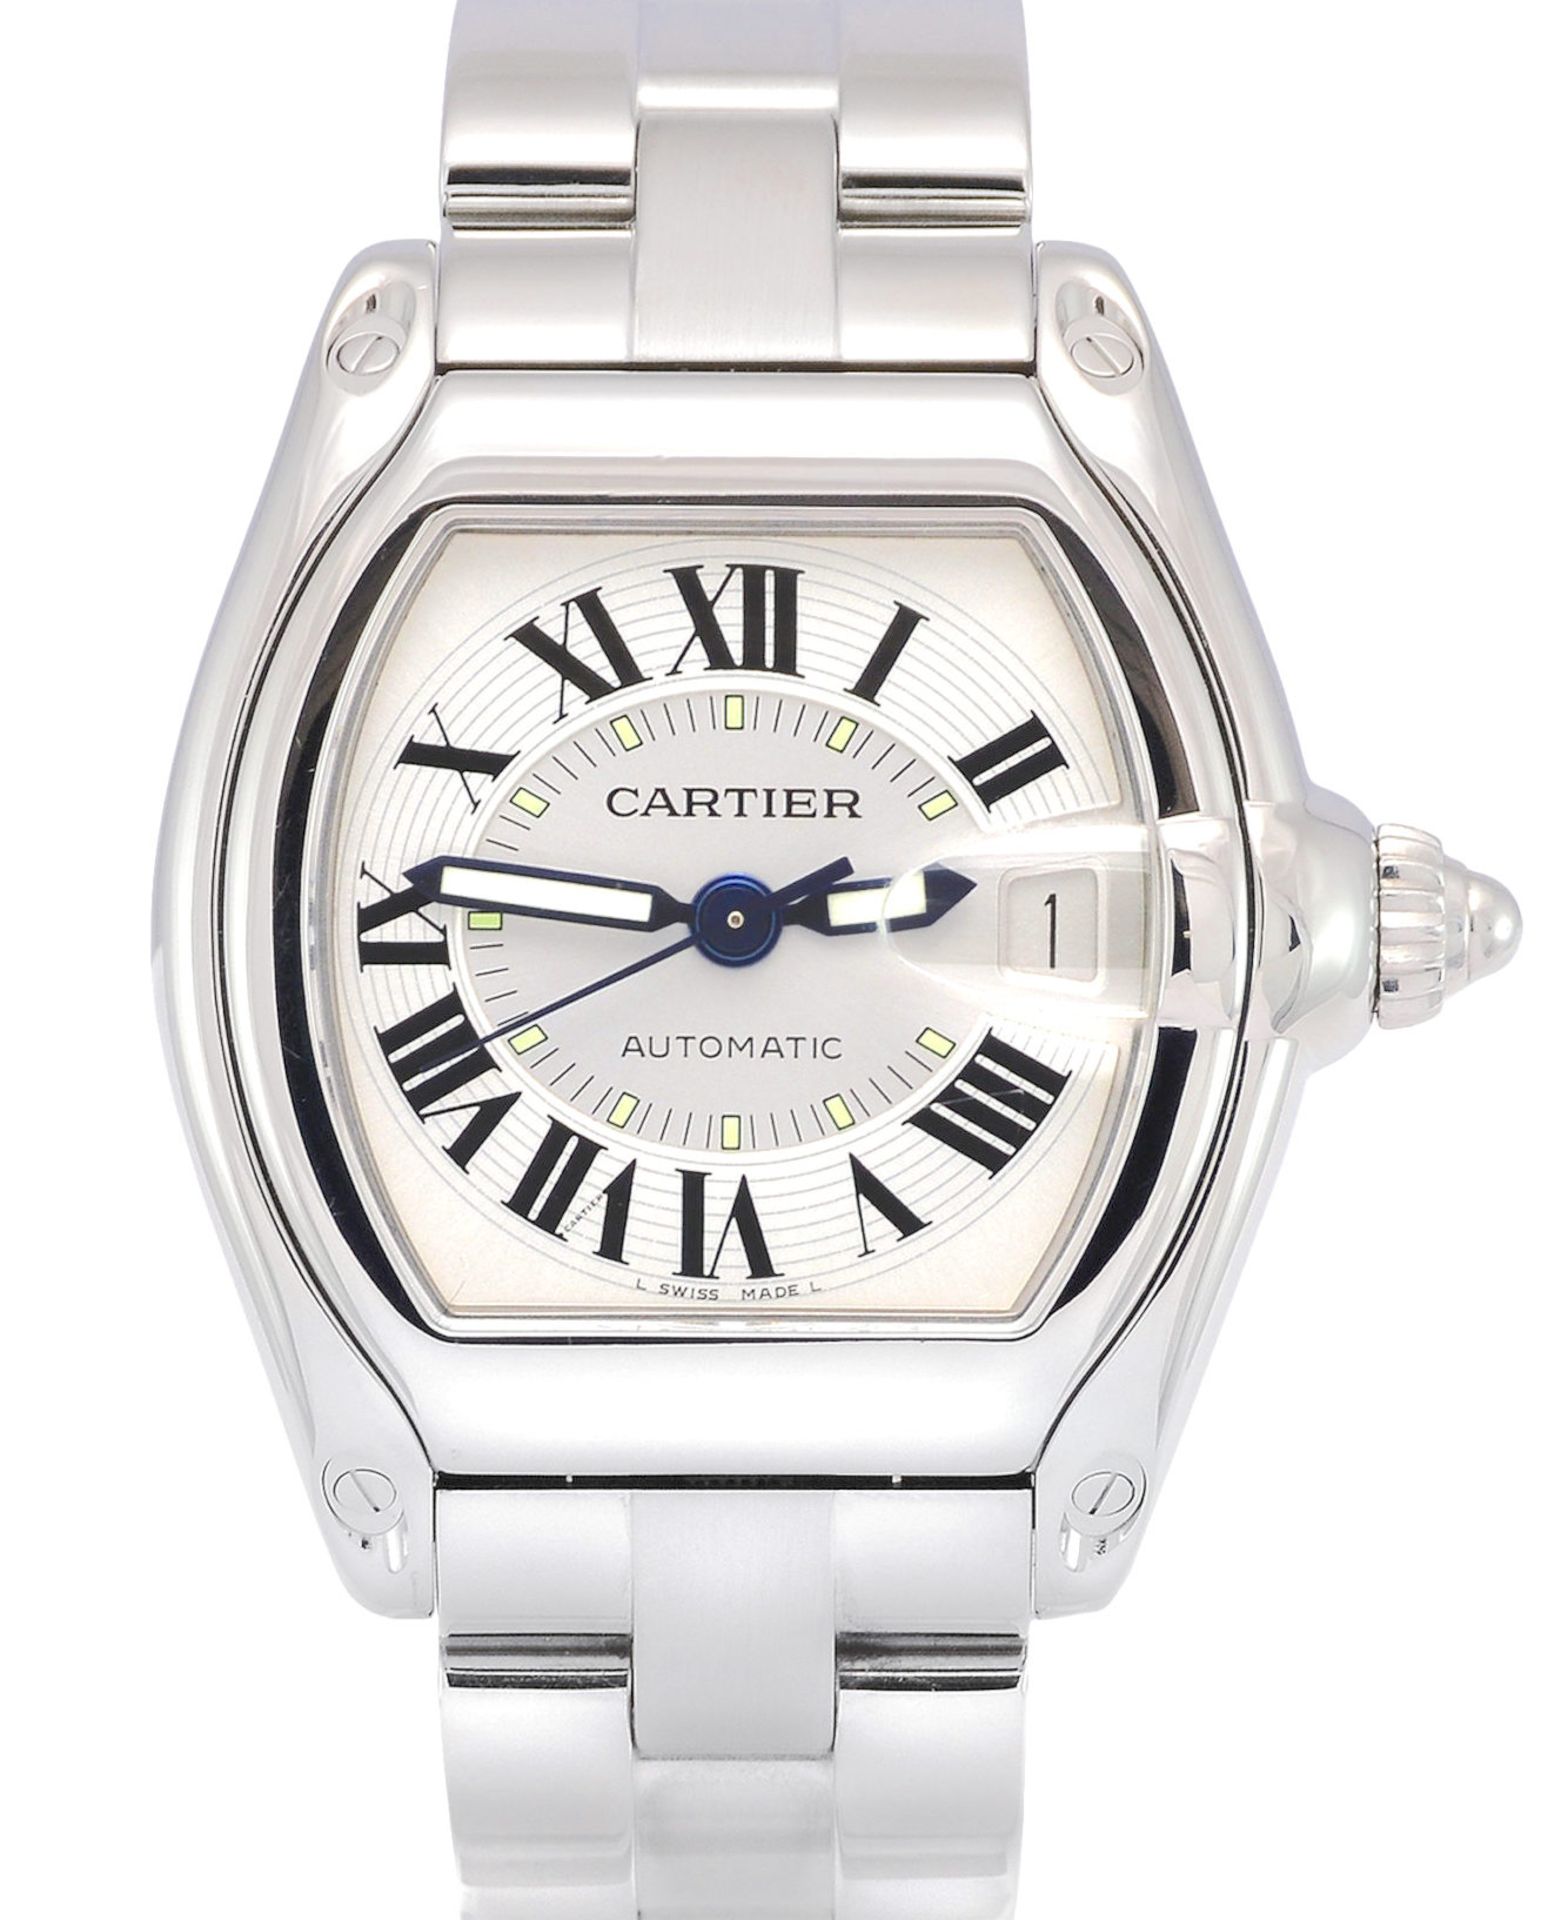 CARTIER ROADSTER REF. 2510 (AUTOMATIC) - SILVER DIAL